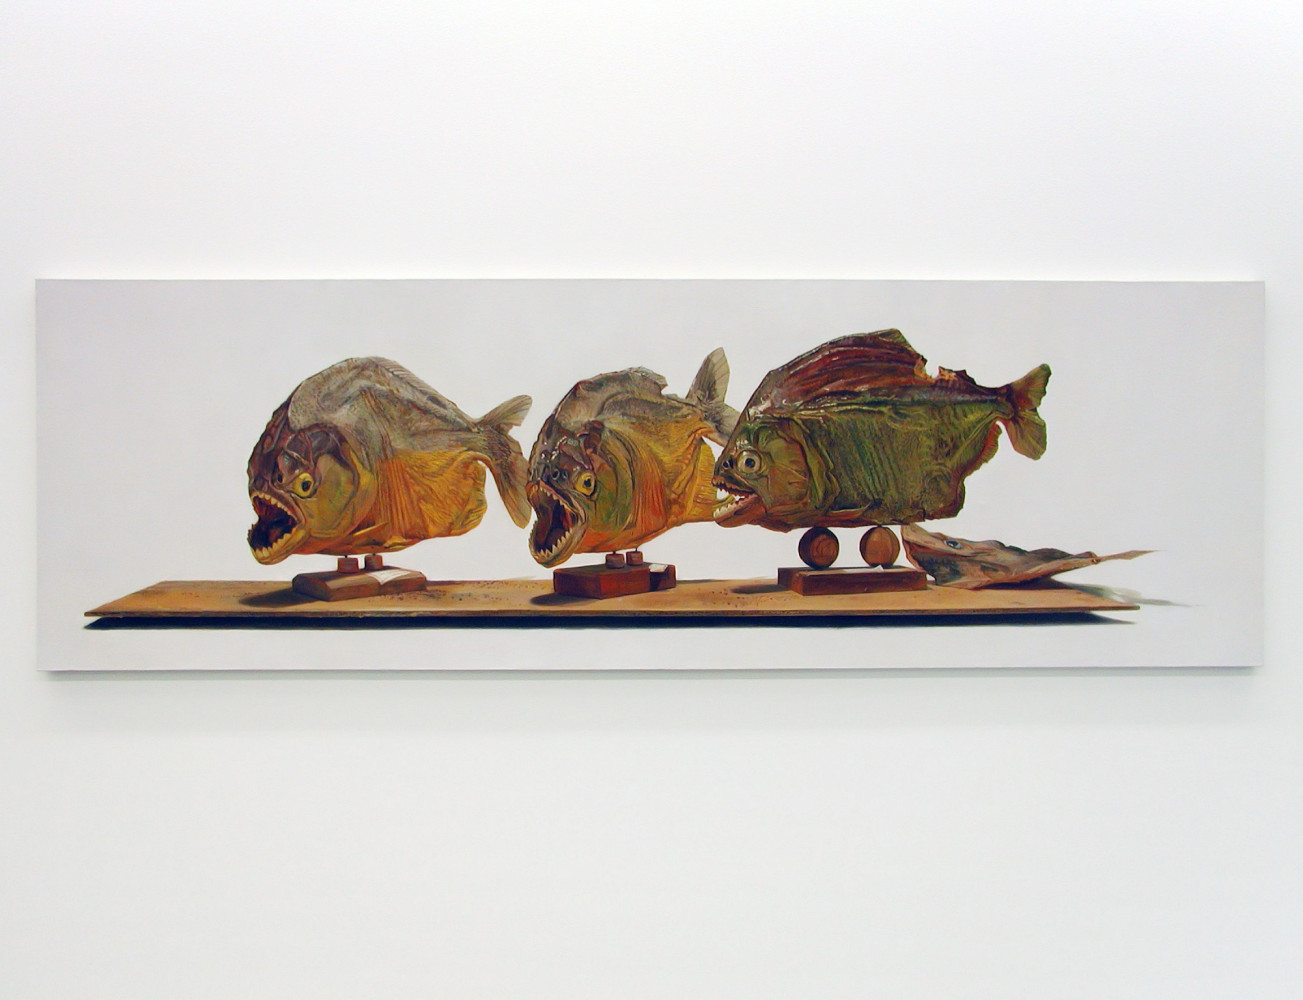 ‘Jim Butler, Bad Fish’, 2001, oil on canvas